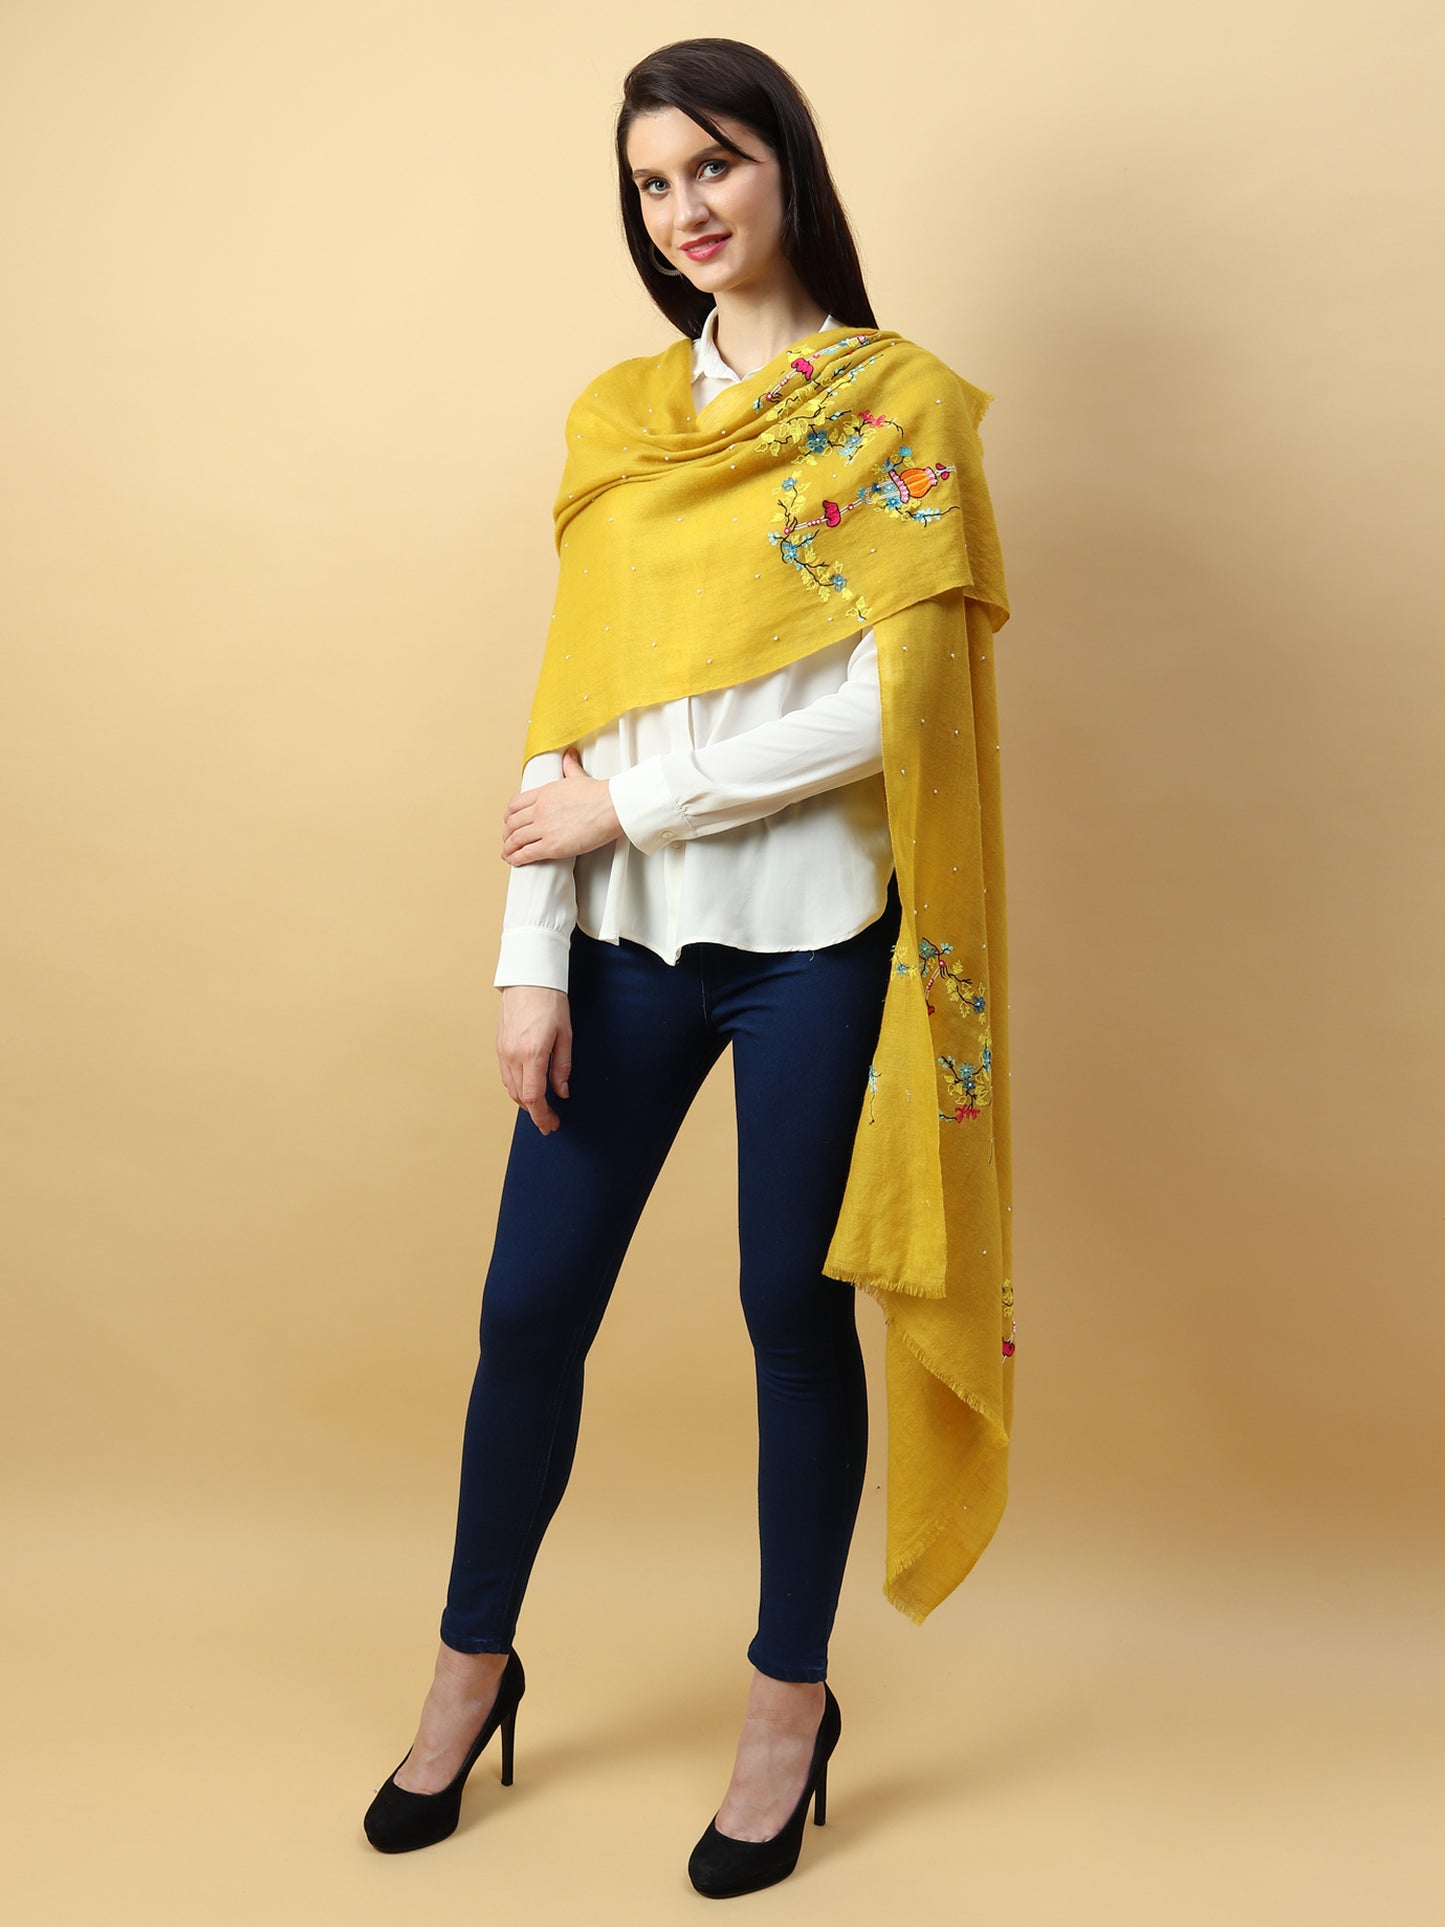 Yellow Shawl, Pure Pashmina Shawl hand embroidered with floral basket pattern